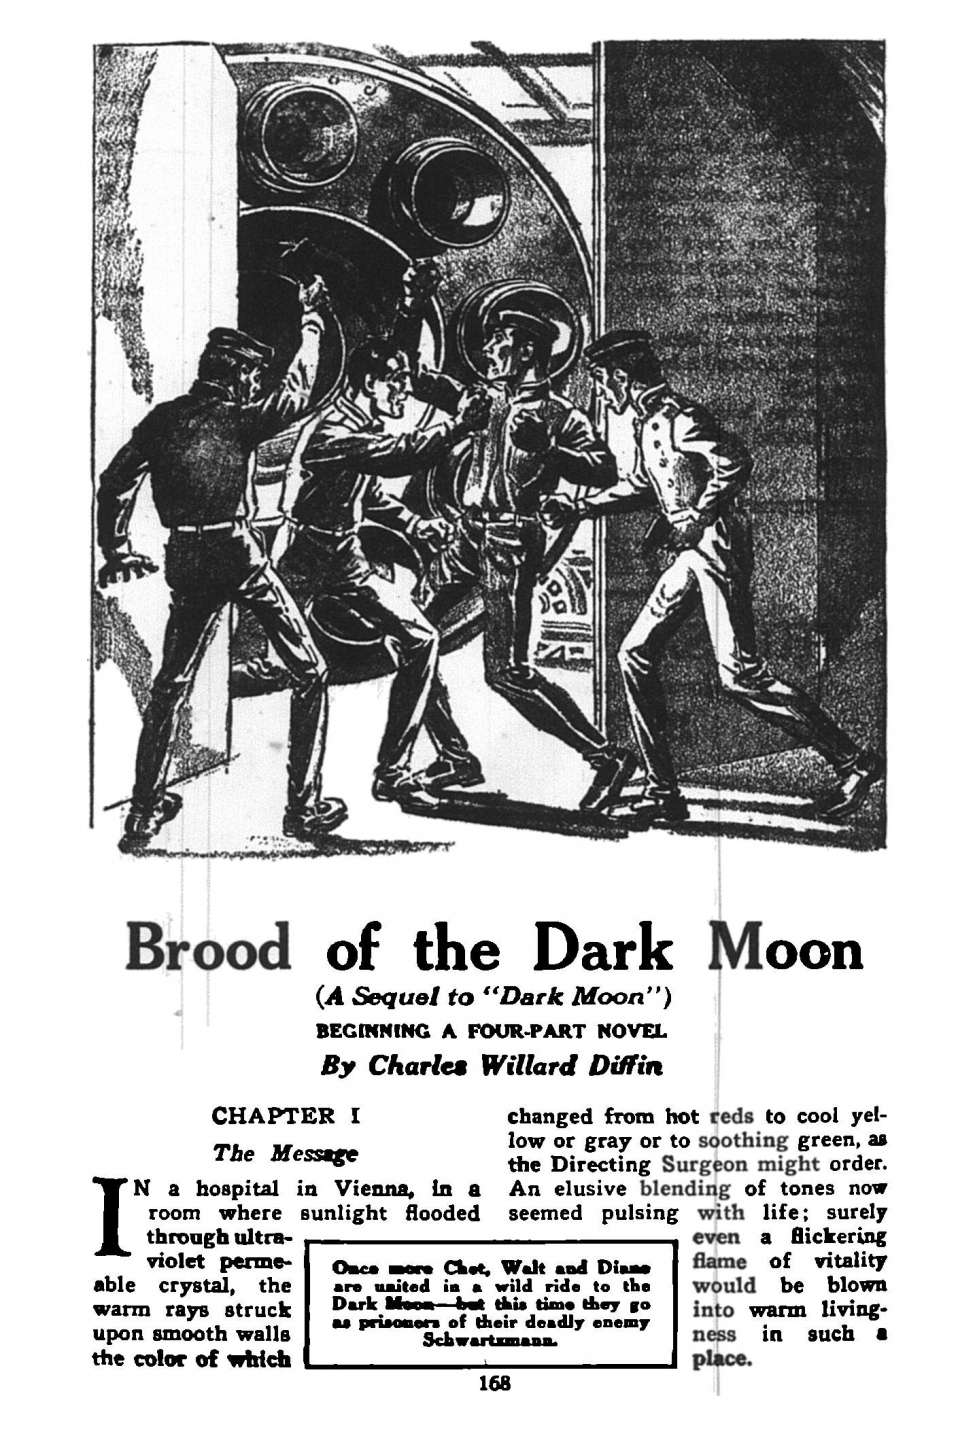 Book Cover For Astounding Serial - Brood of the Dark Moon - C W Diffin